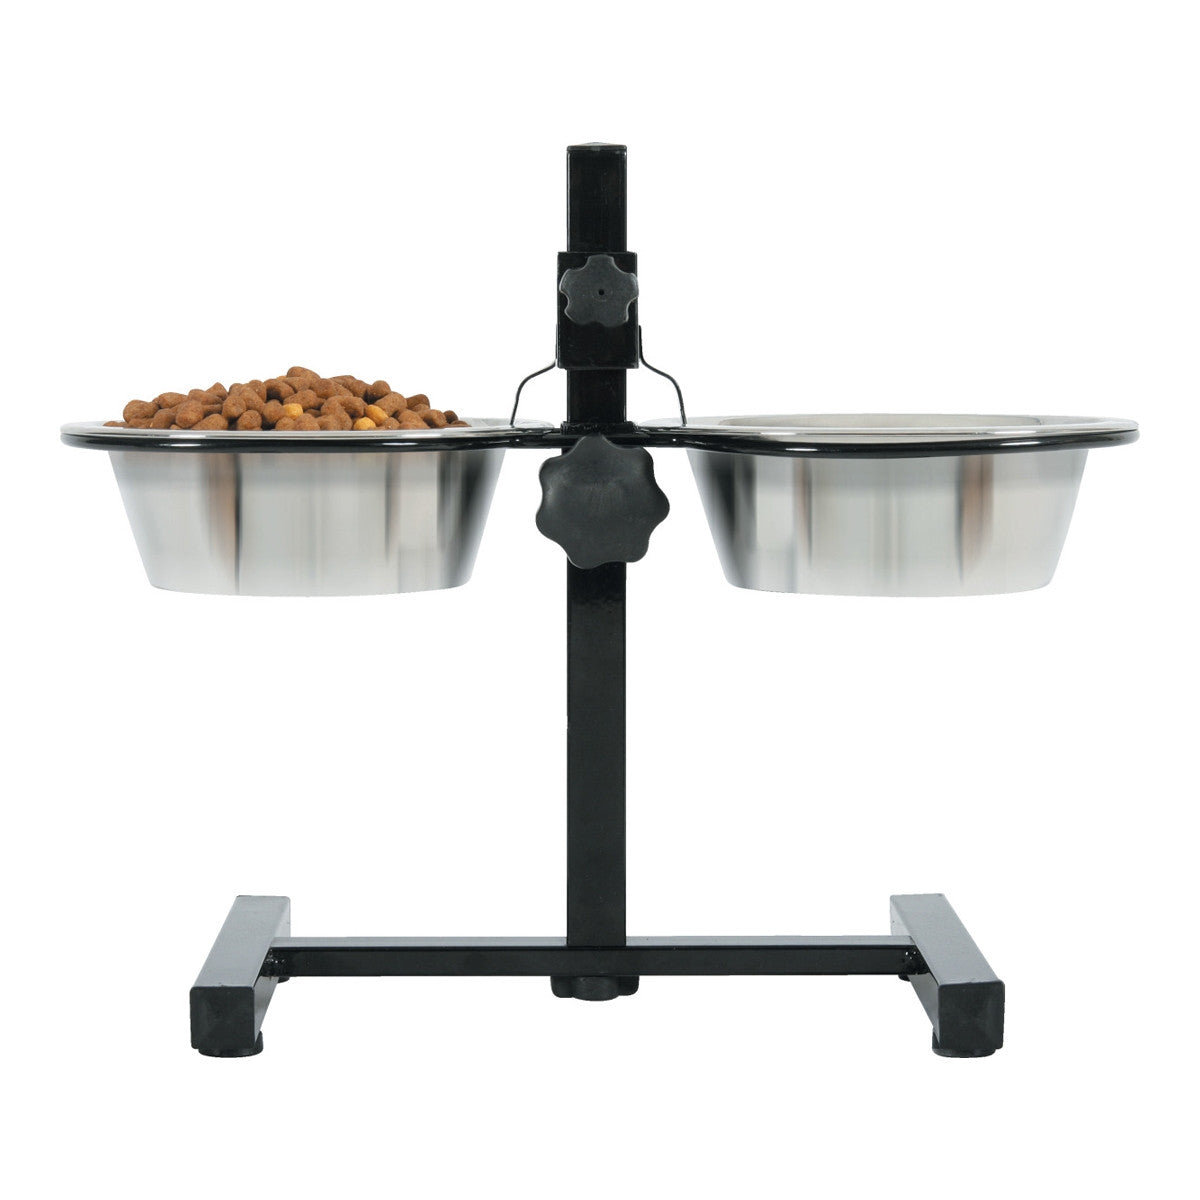 ZOLUX Adjustable Stand with Stainless Steel Bowls (0.7L)